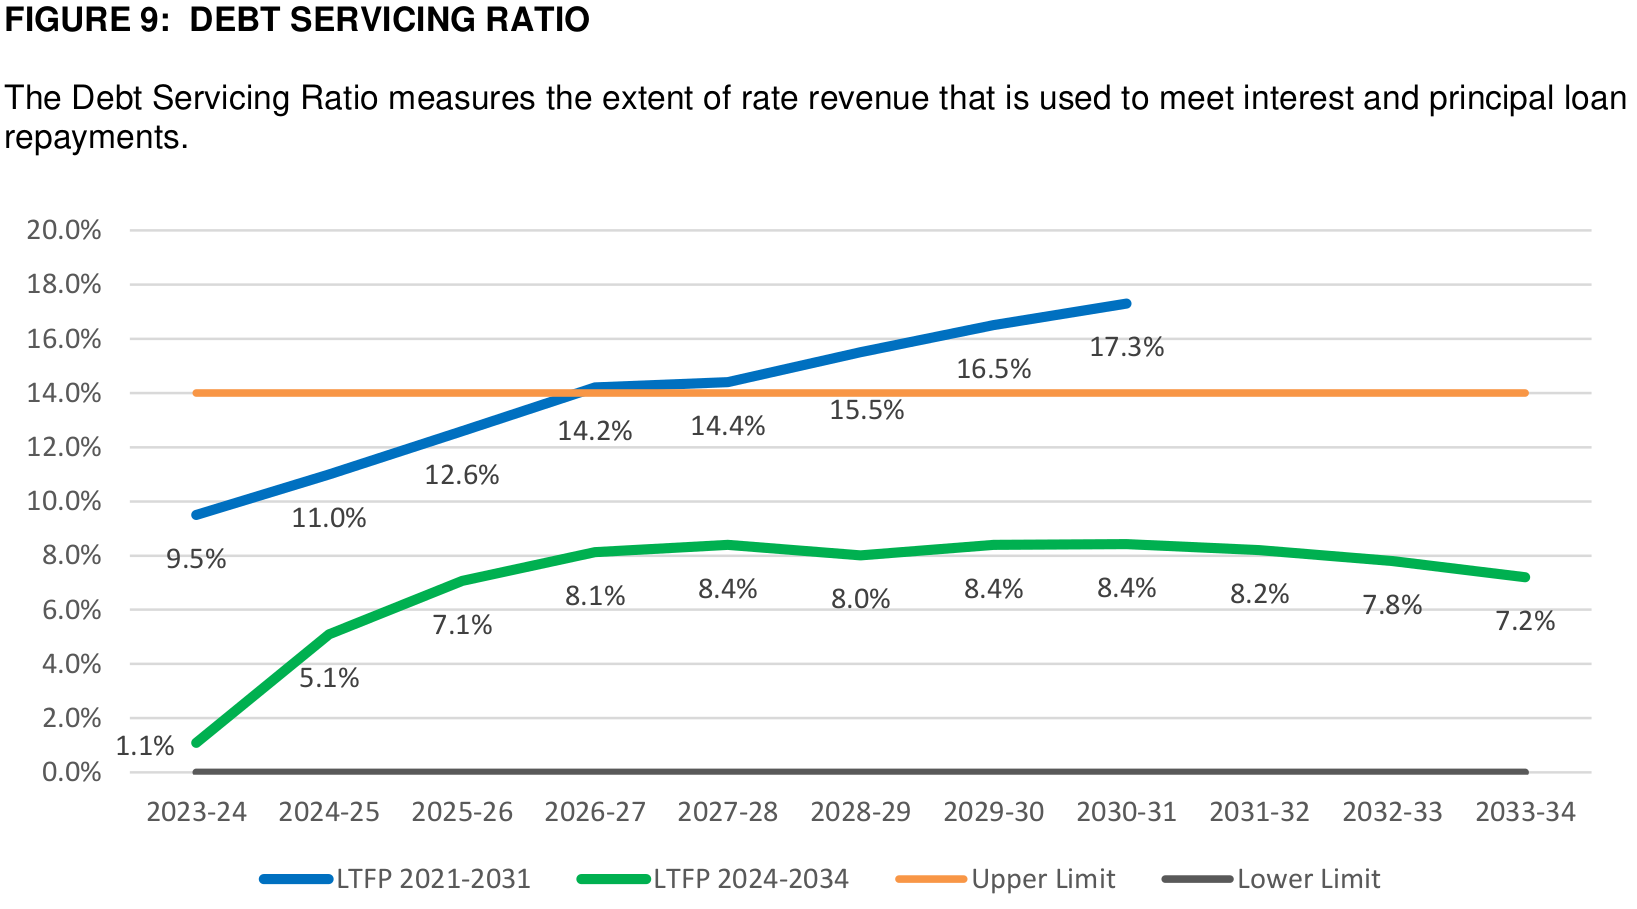 Debt Servicing Ratio from the LTFP